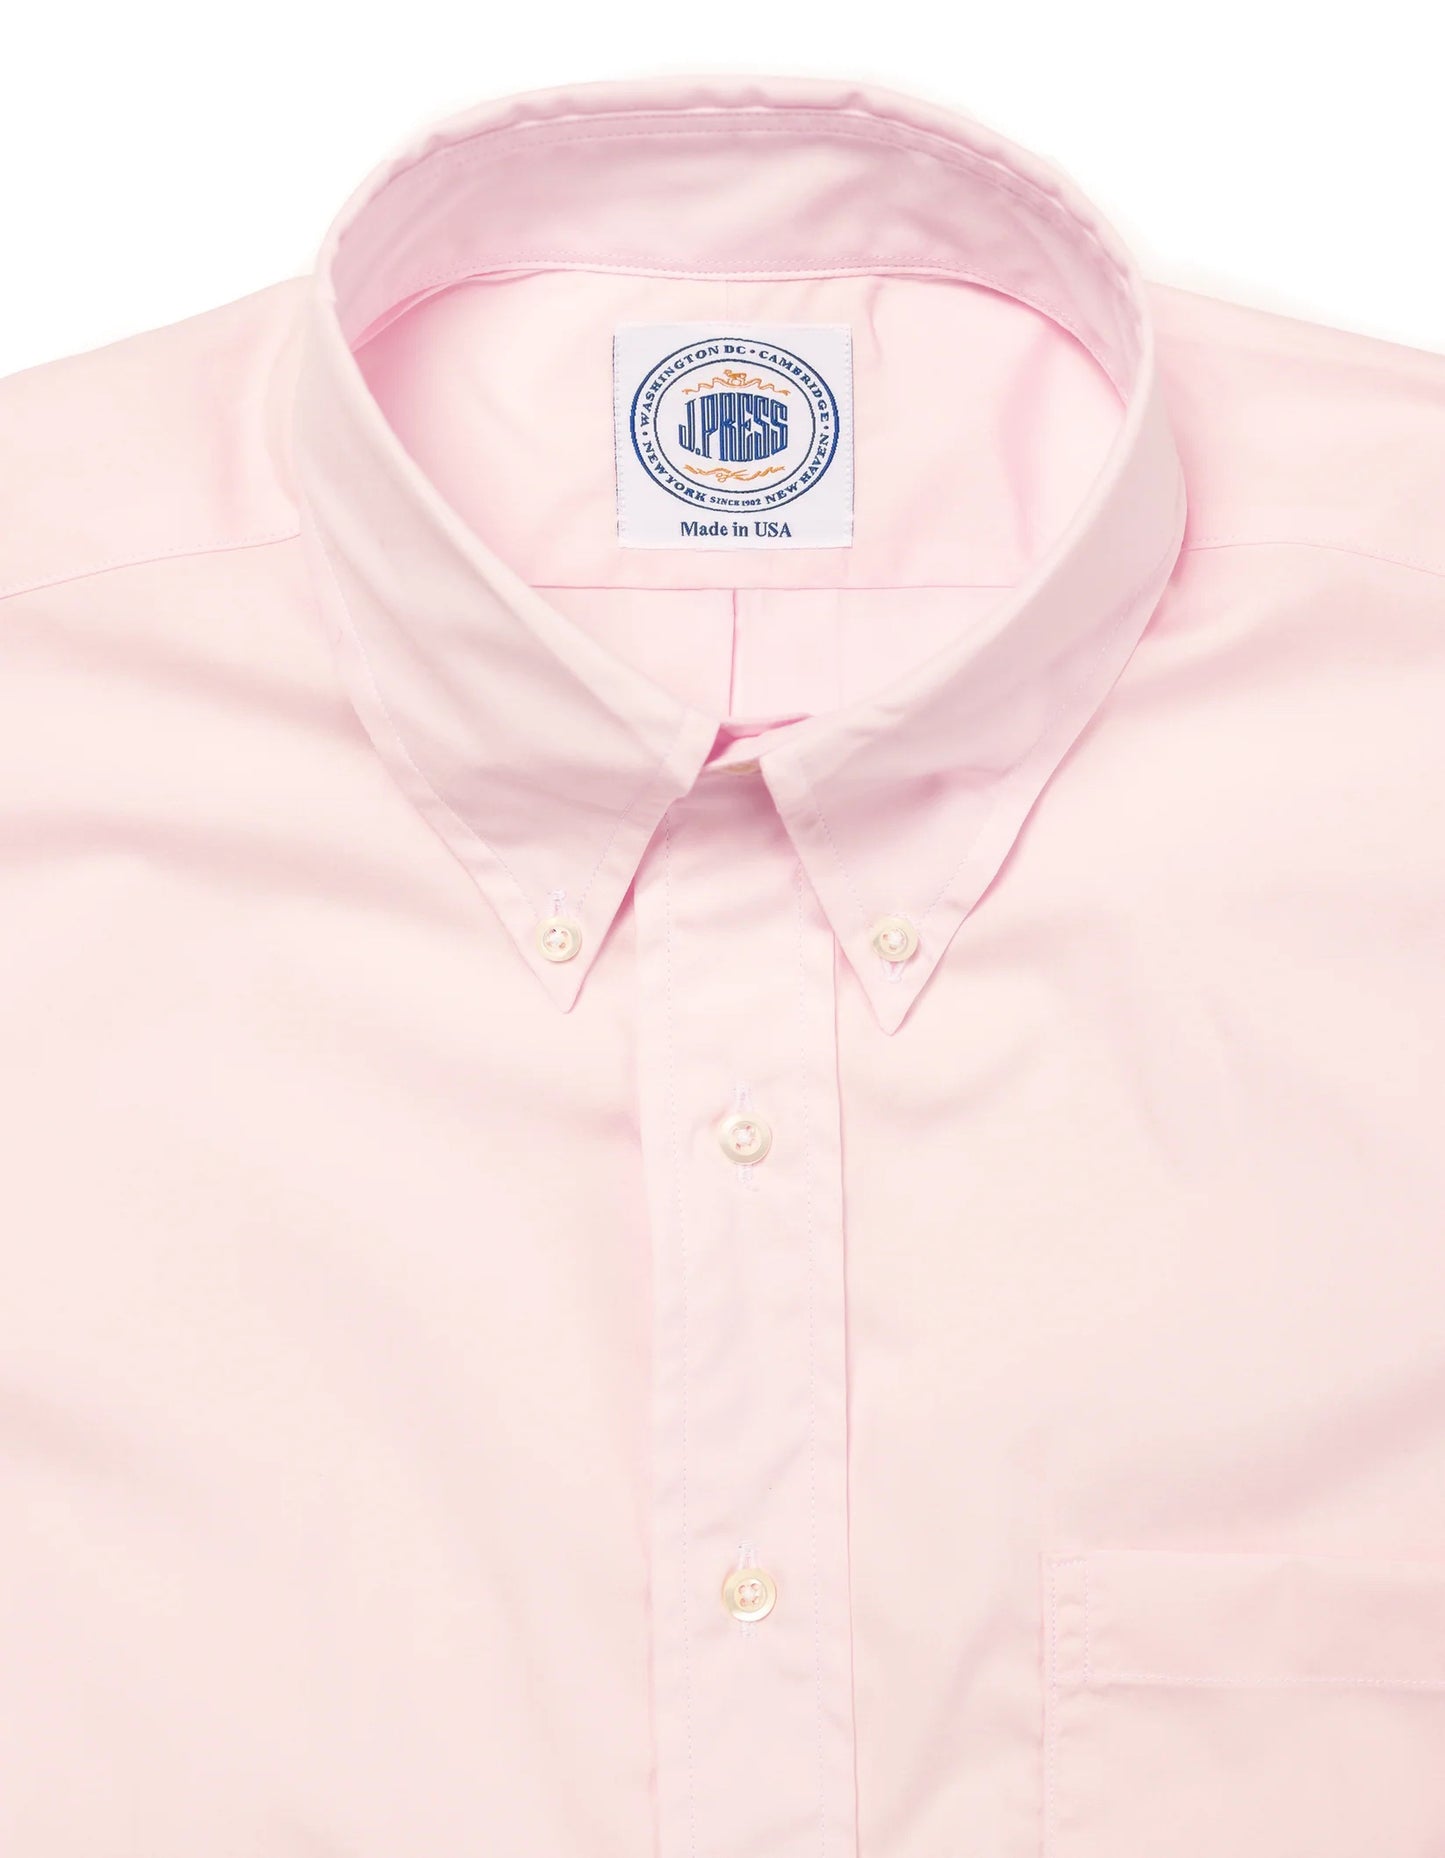 2-PLY 100s - PINK SOLID DRESS SHIRT